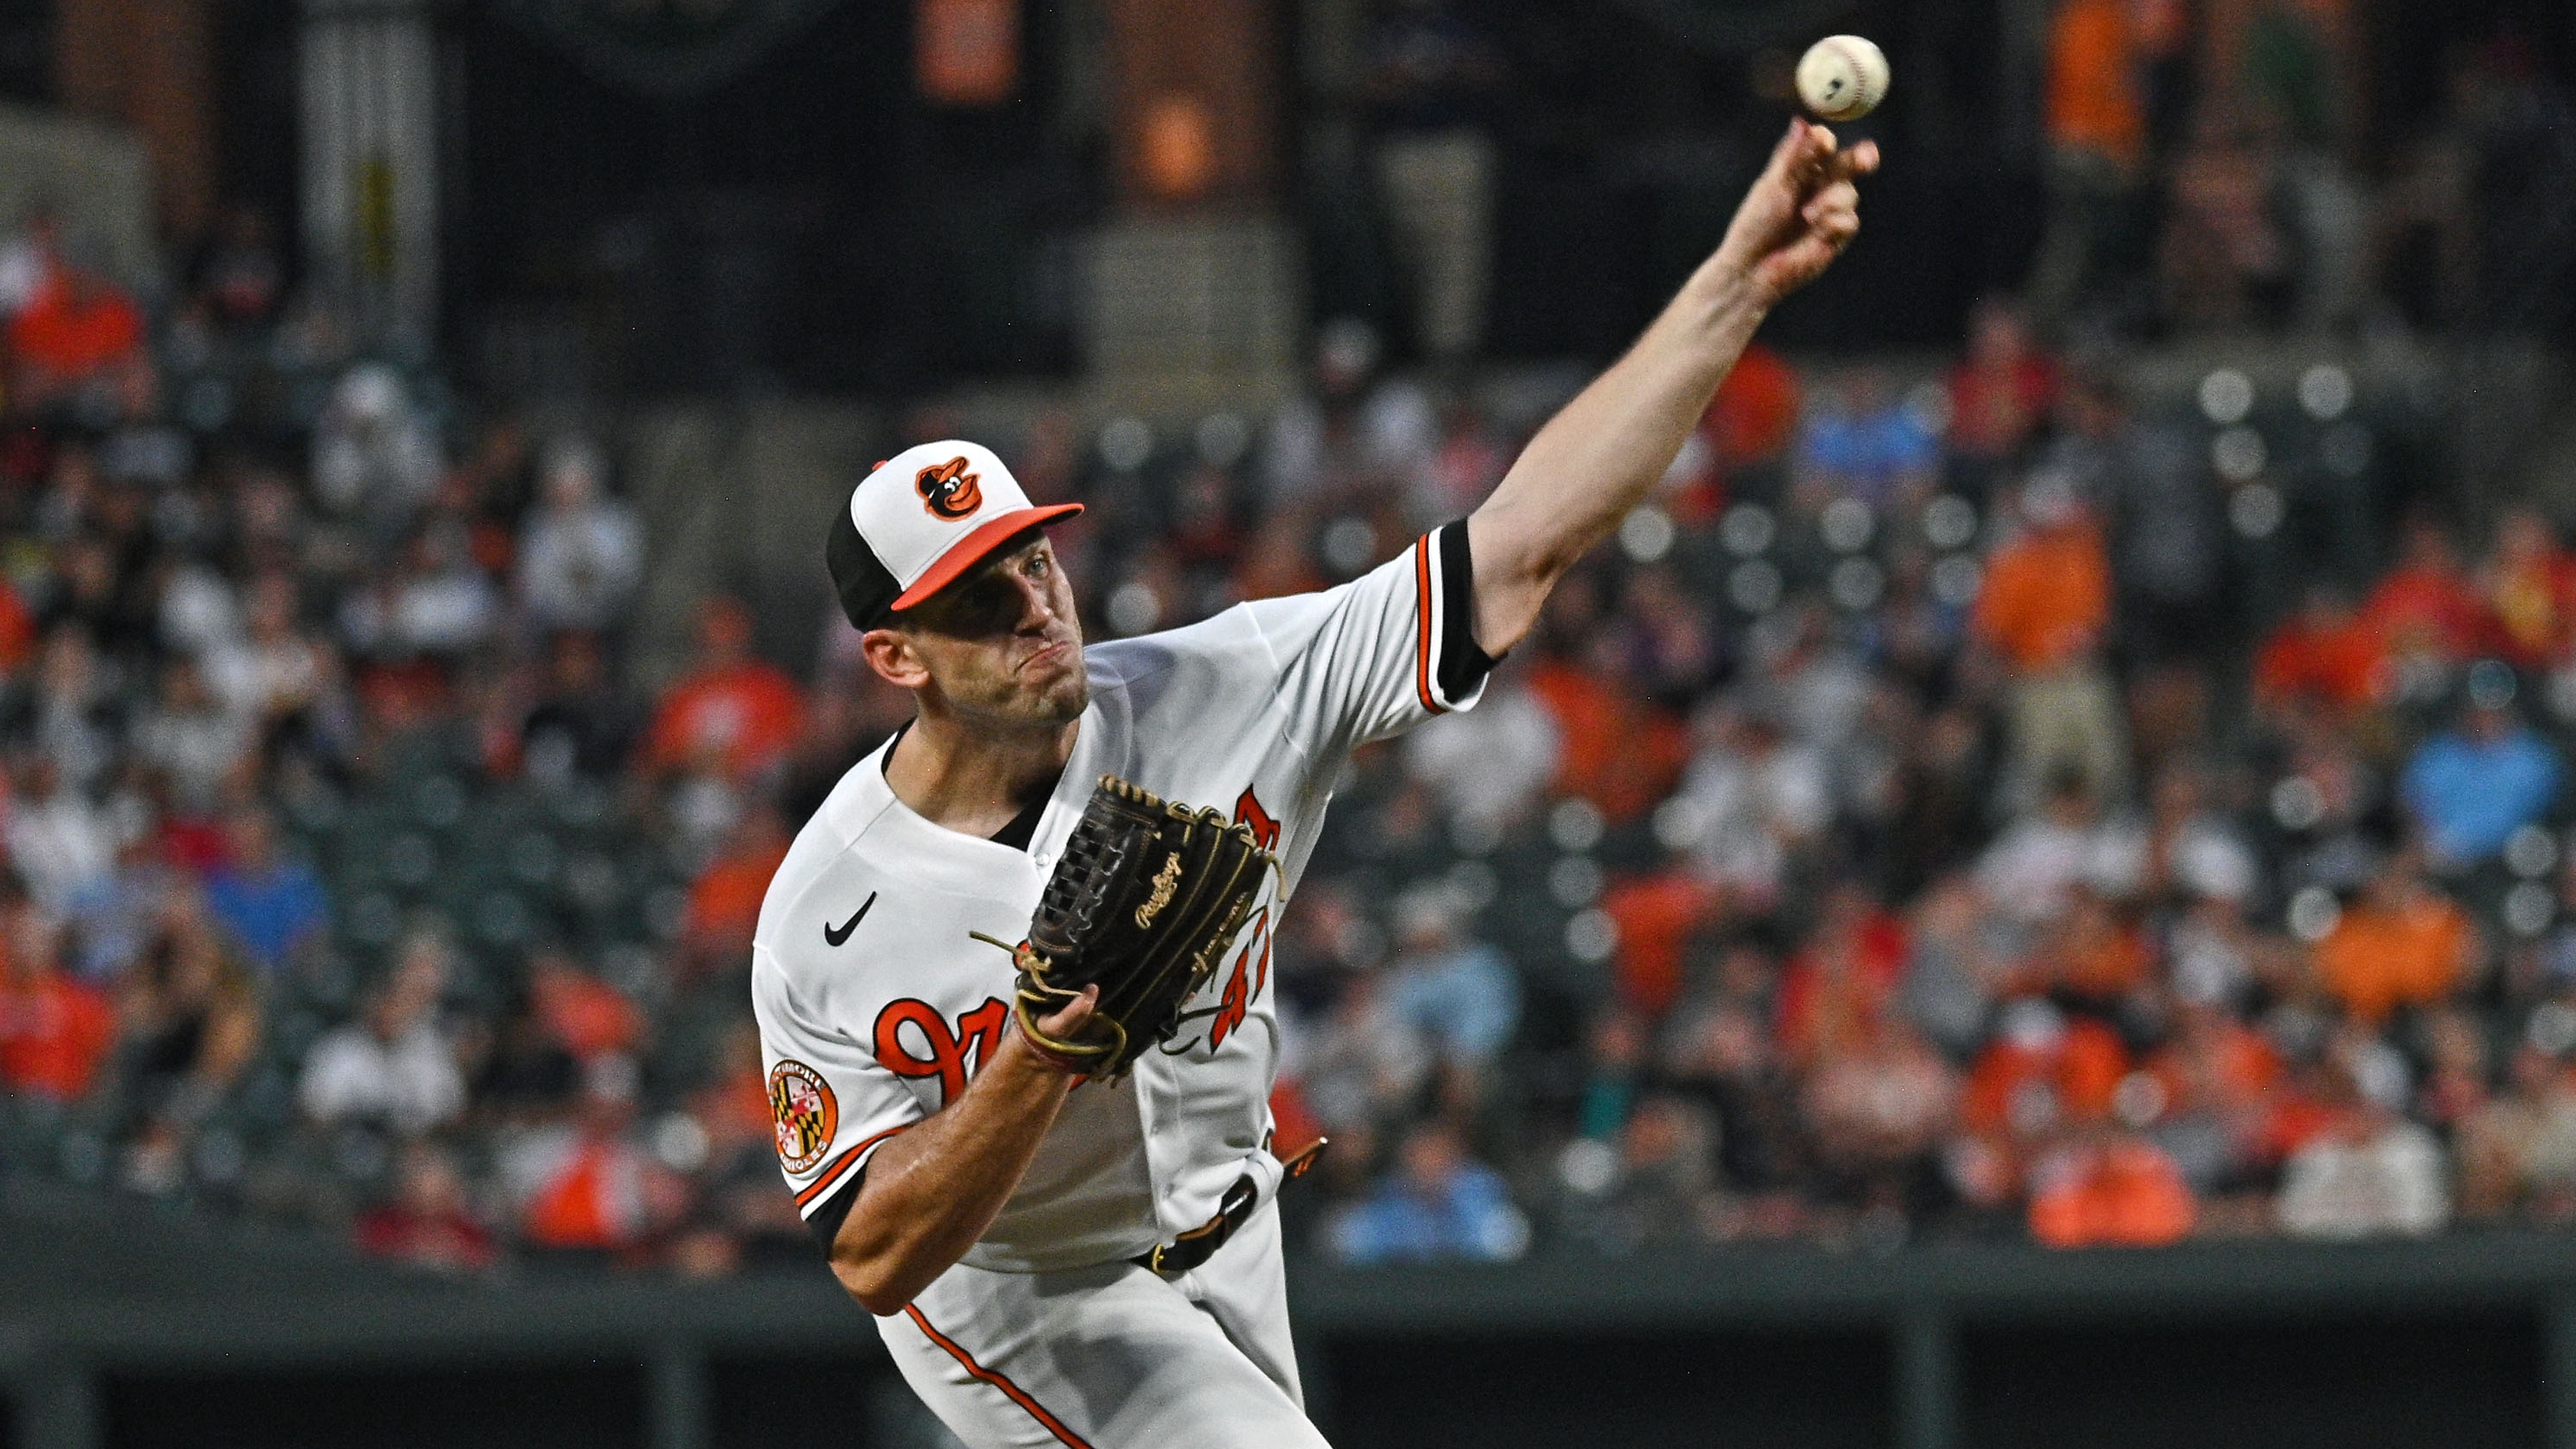 Orioles may have lost Tuesday night, but John Means was solid in